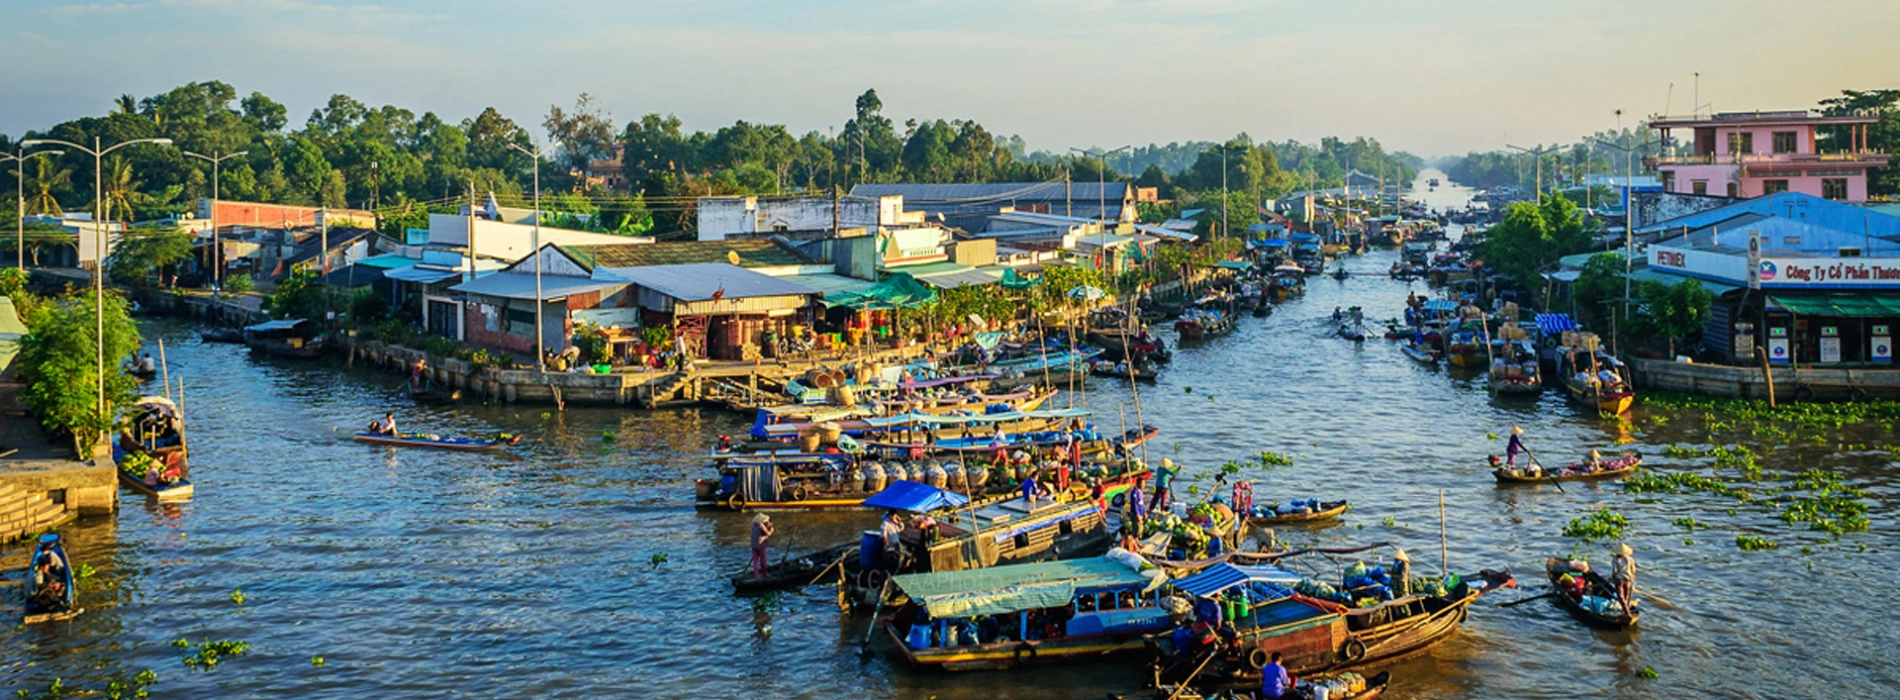 Top 5 most beautiful floating markets in Vietnam